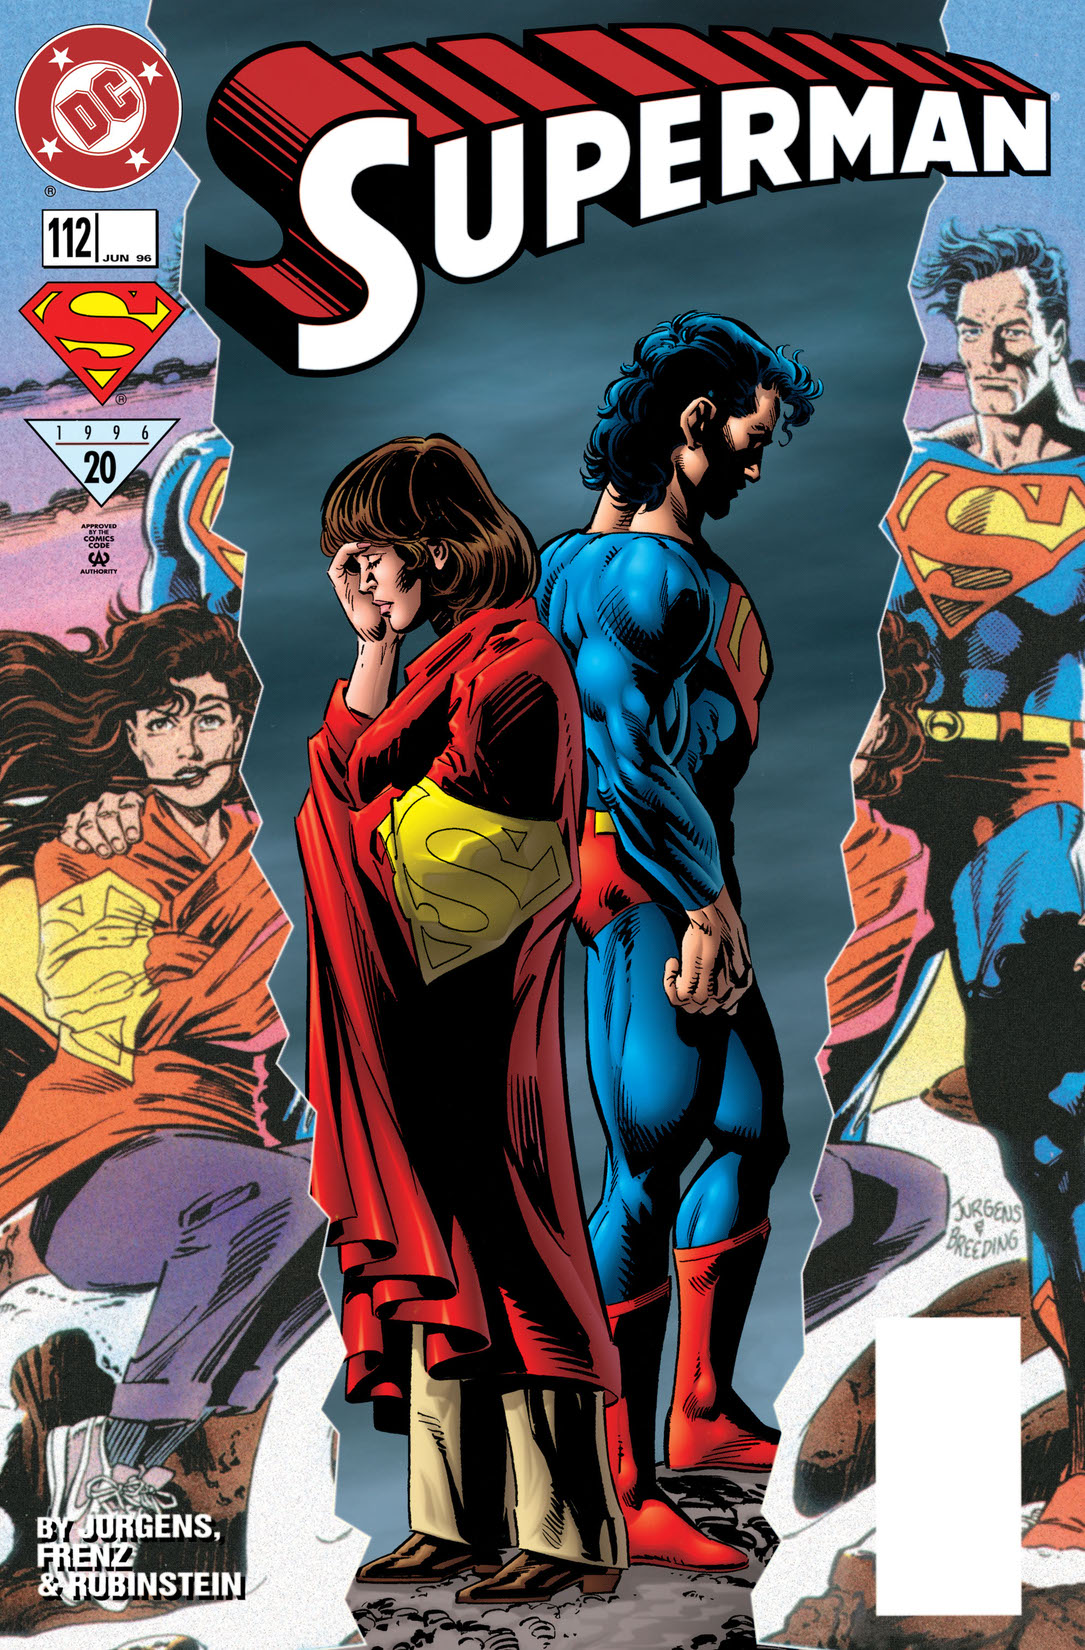 Superman (1986-) #112 preview images